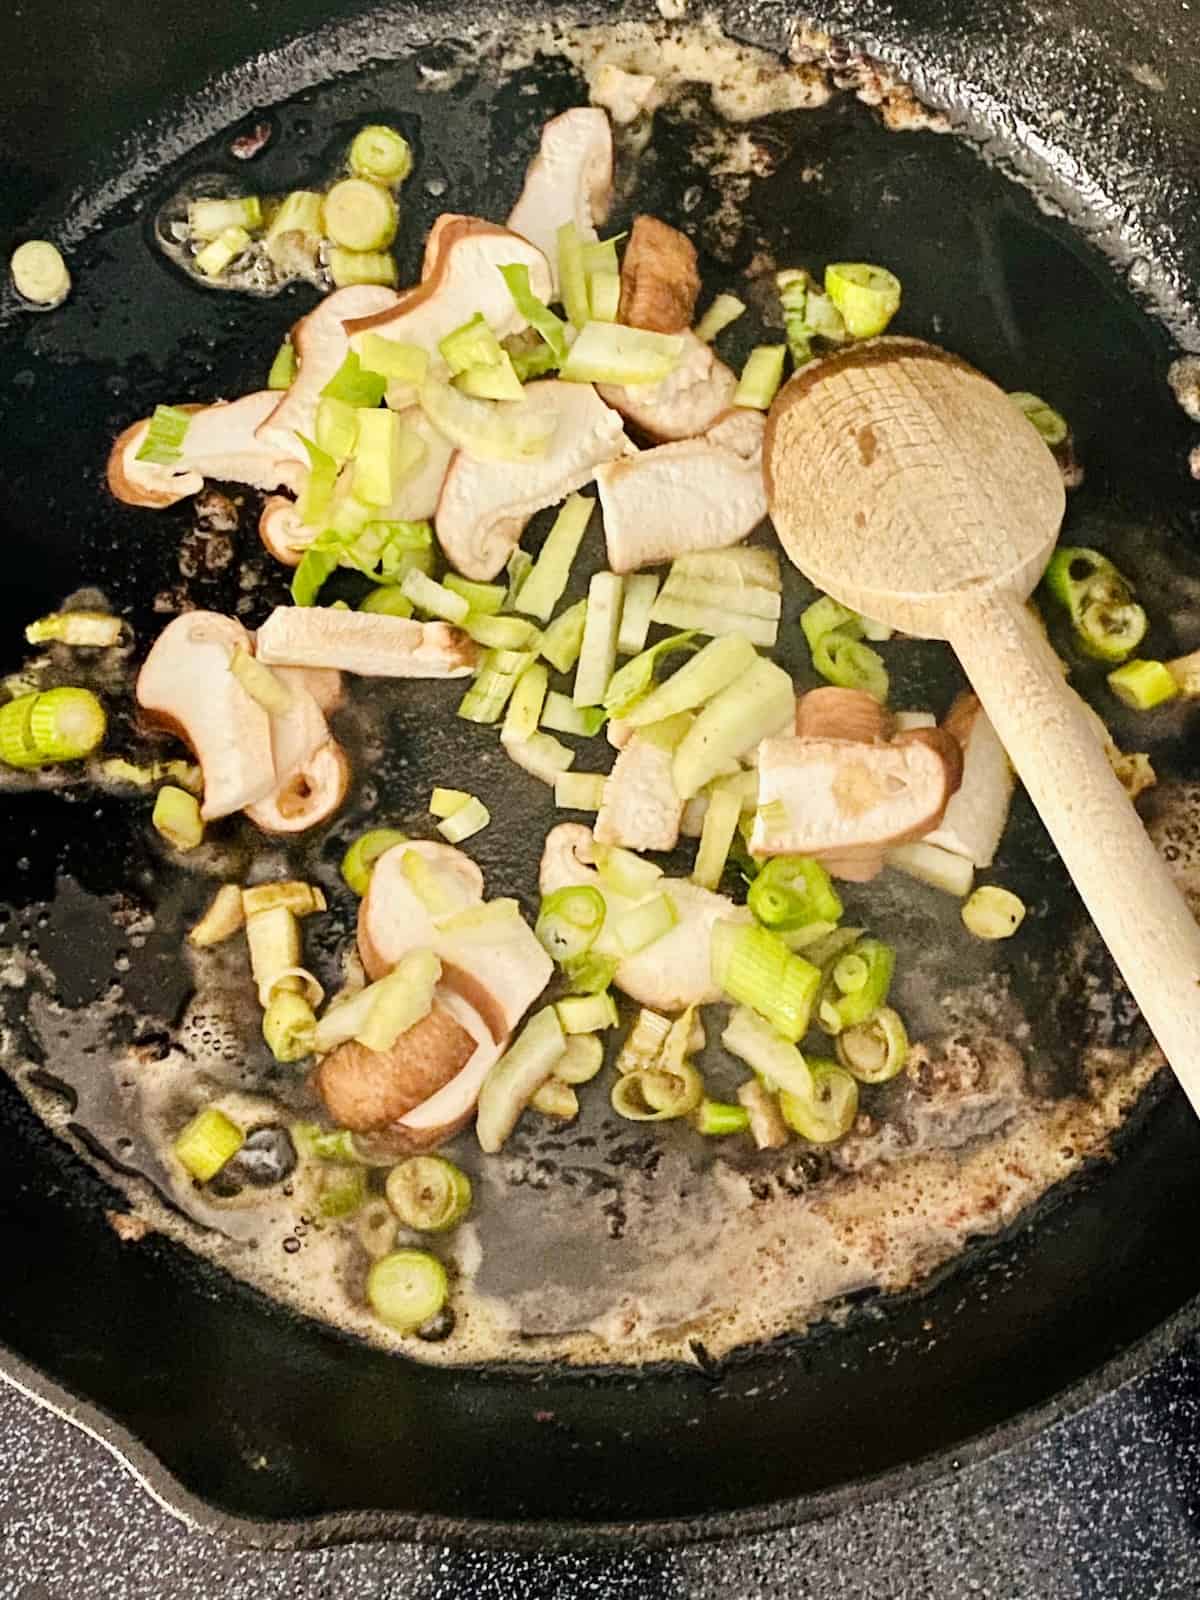 Add vegetables to melted butter in cast iron.